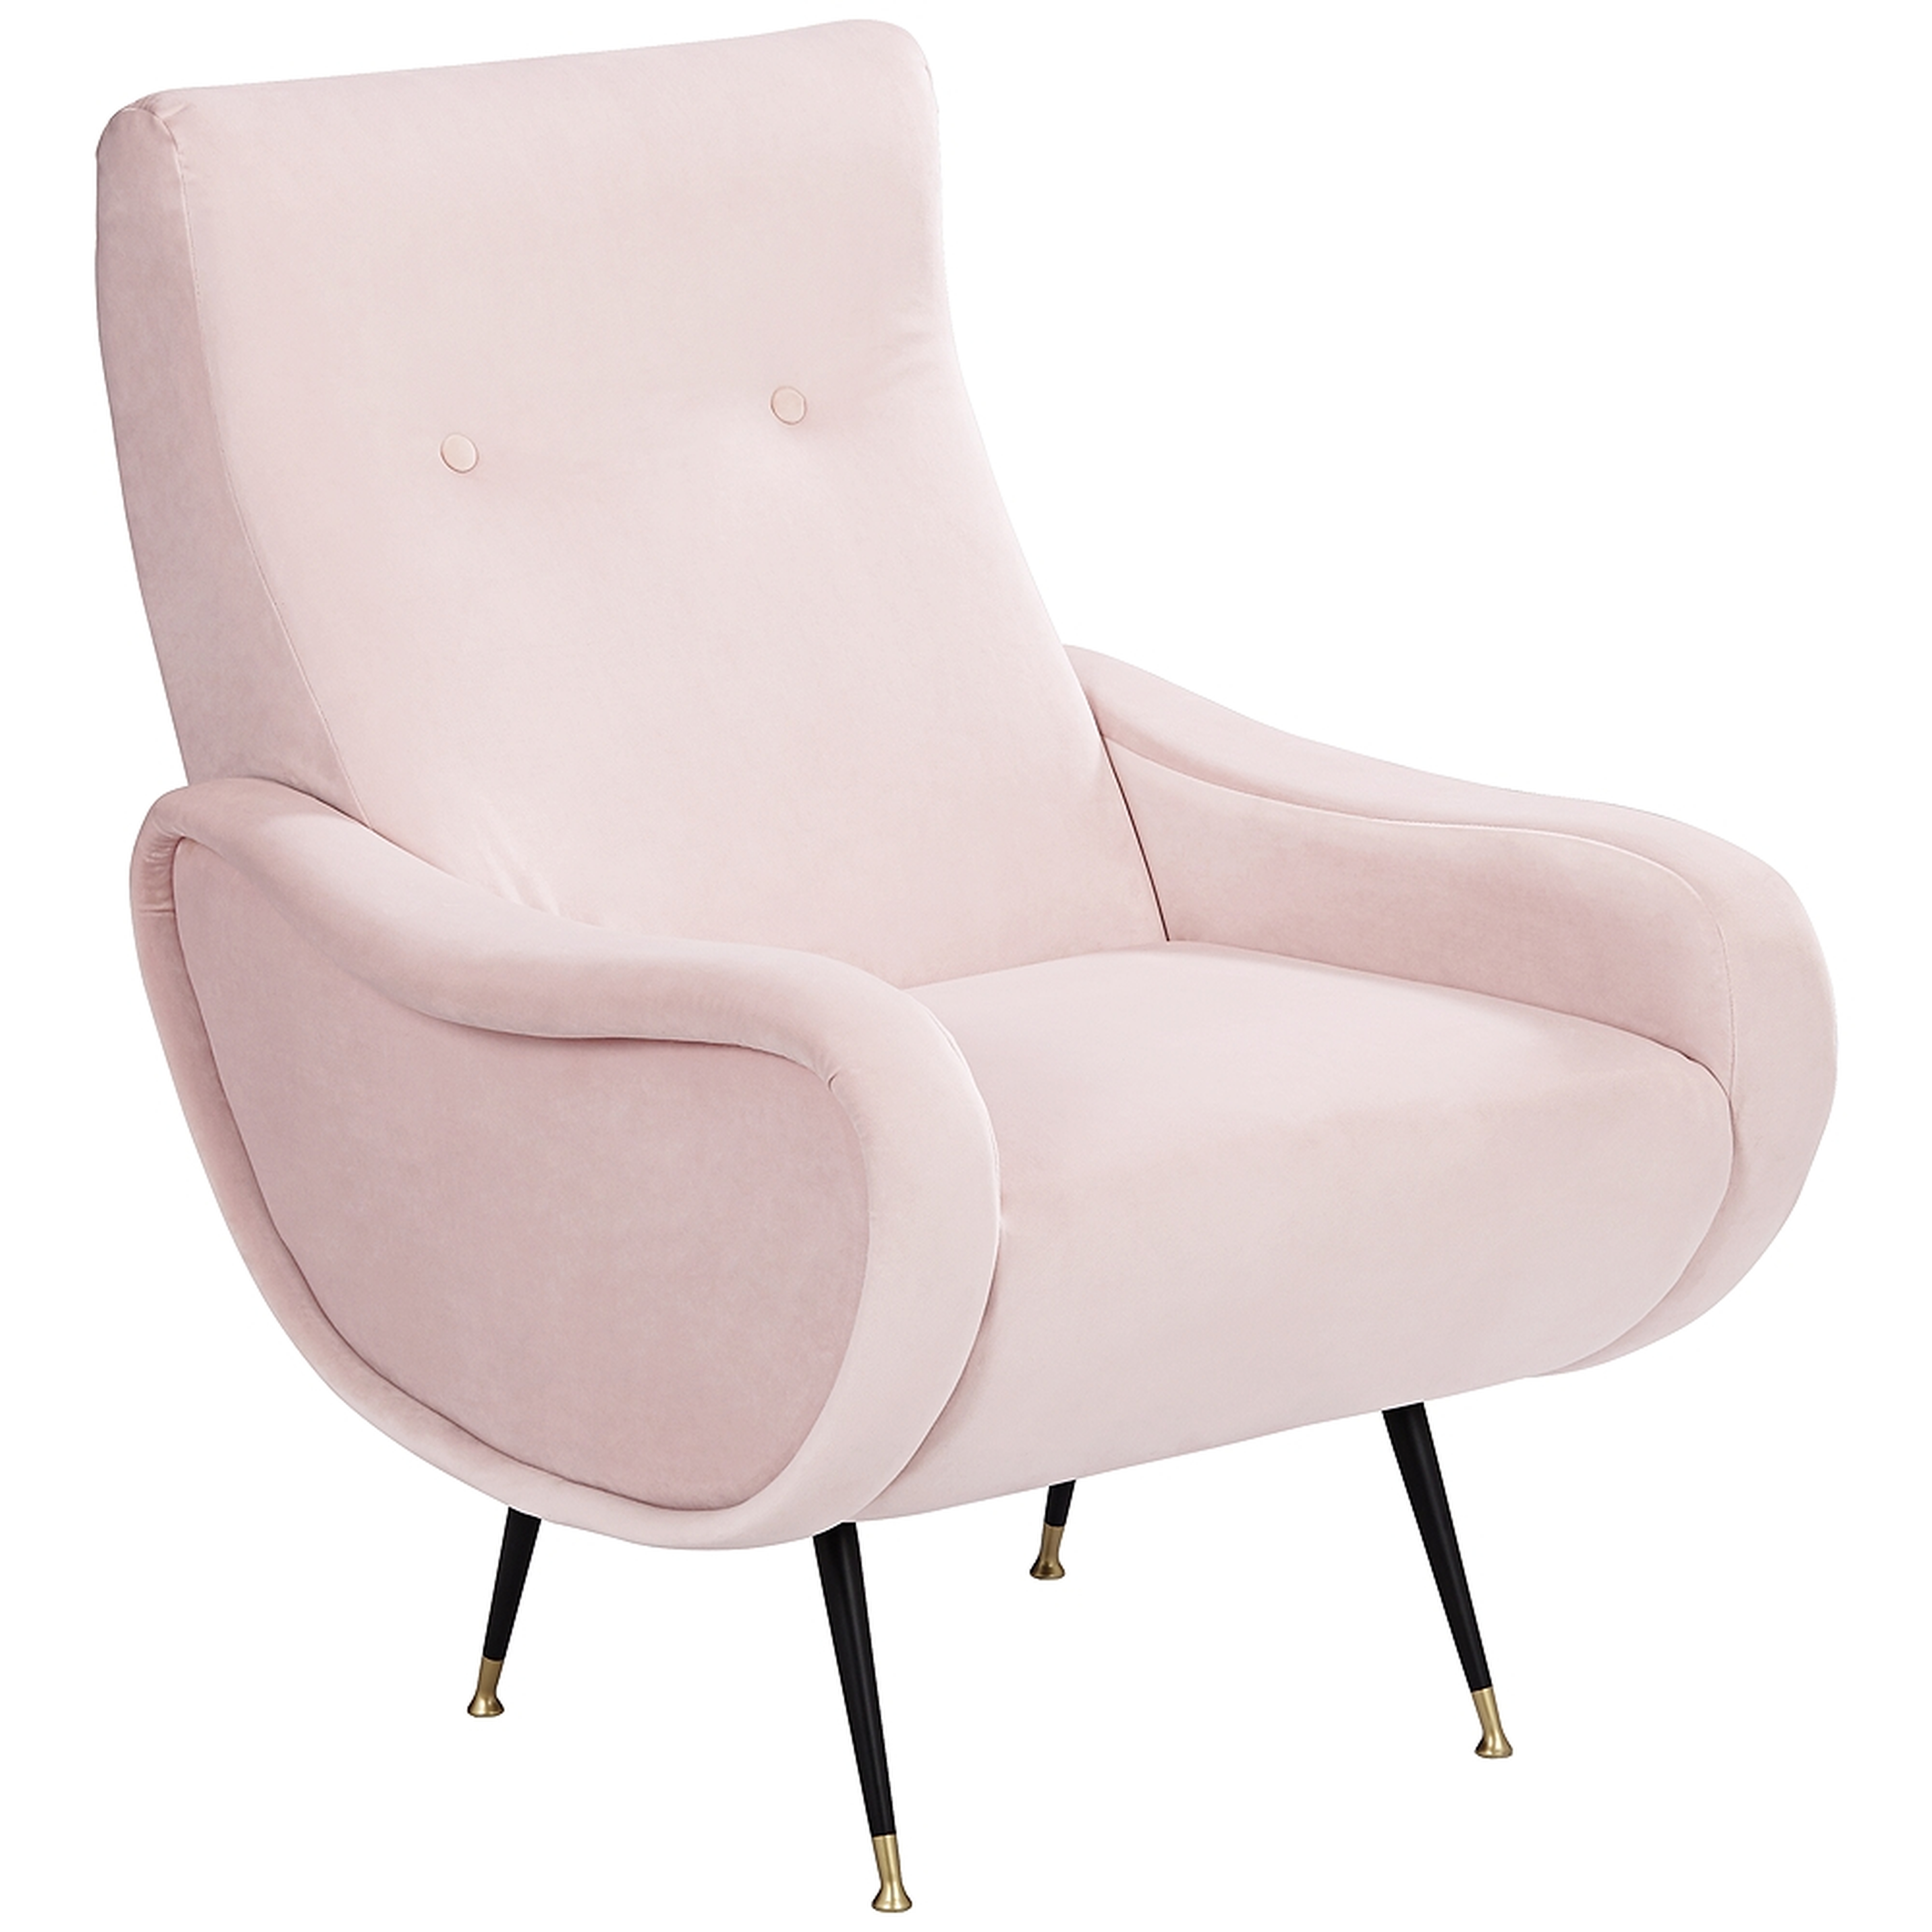 Martini Pink Velvet Tufted High-Back Armchair - Style # 72R88 - Lamps Plus